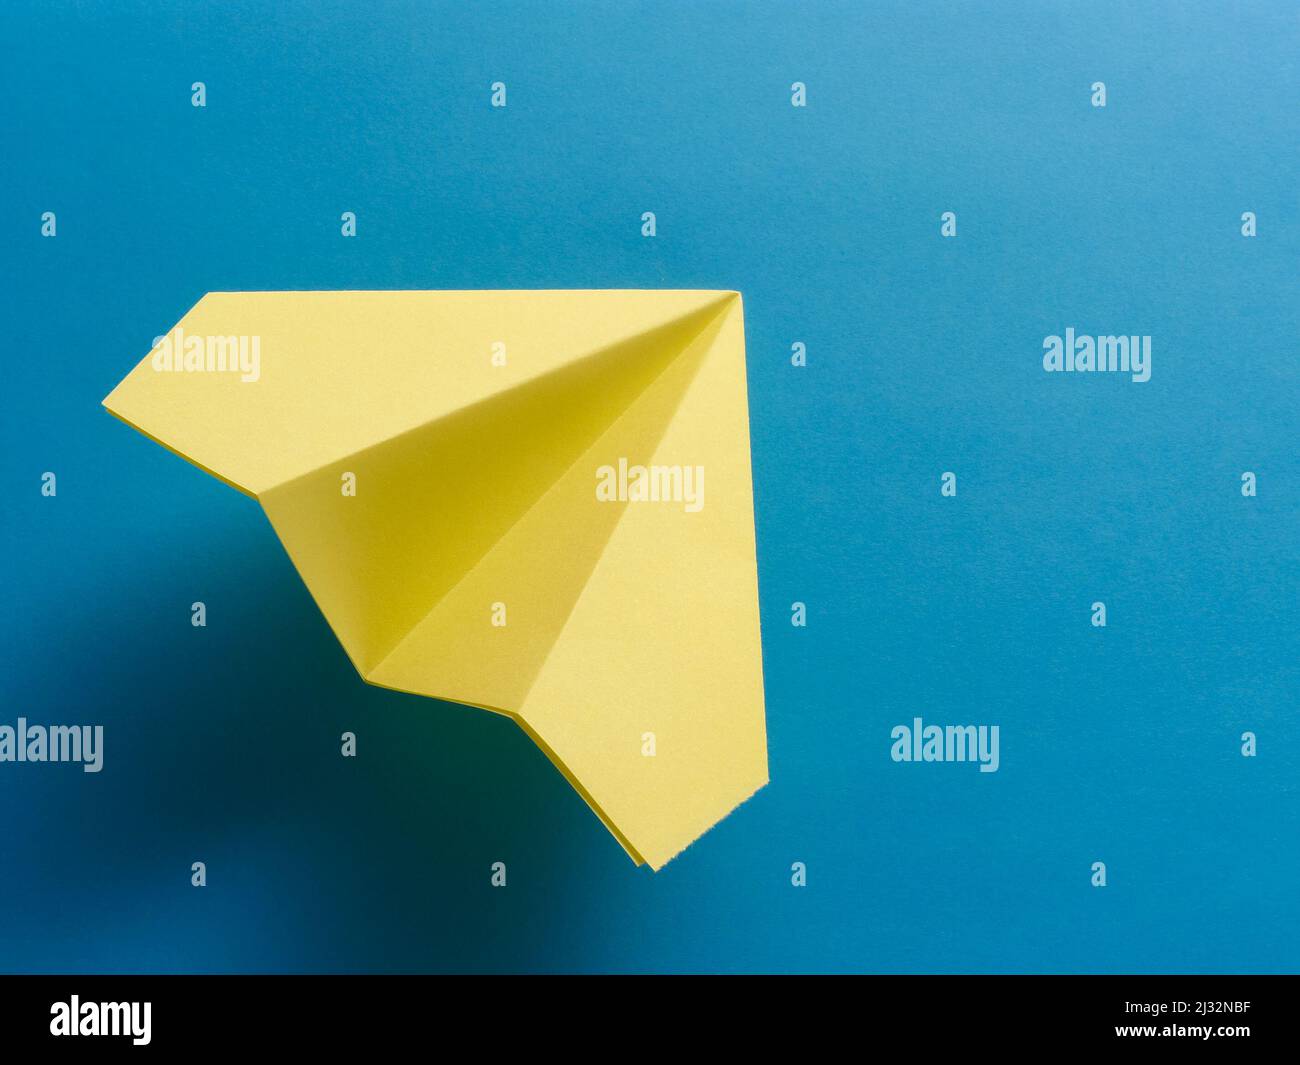 Yellow origami fighter jet on blue background. Stock Photo